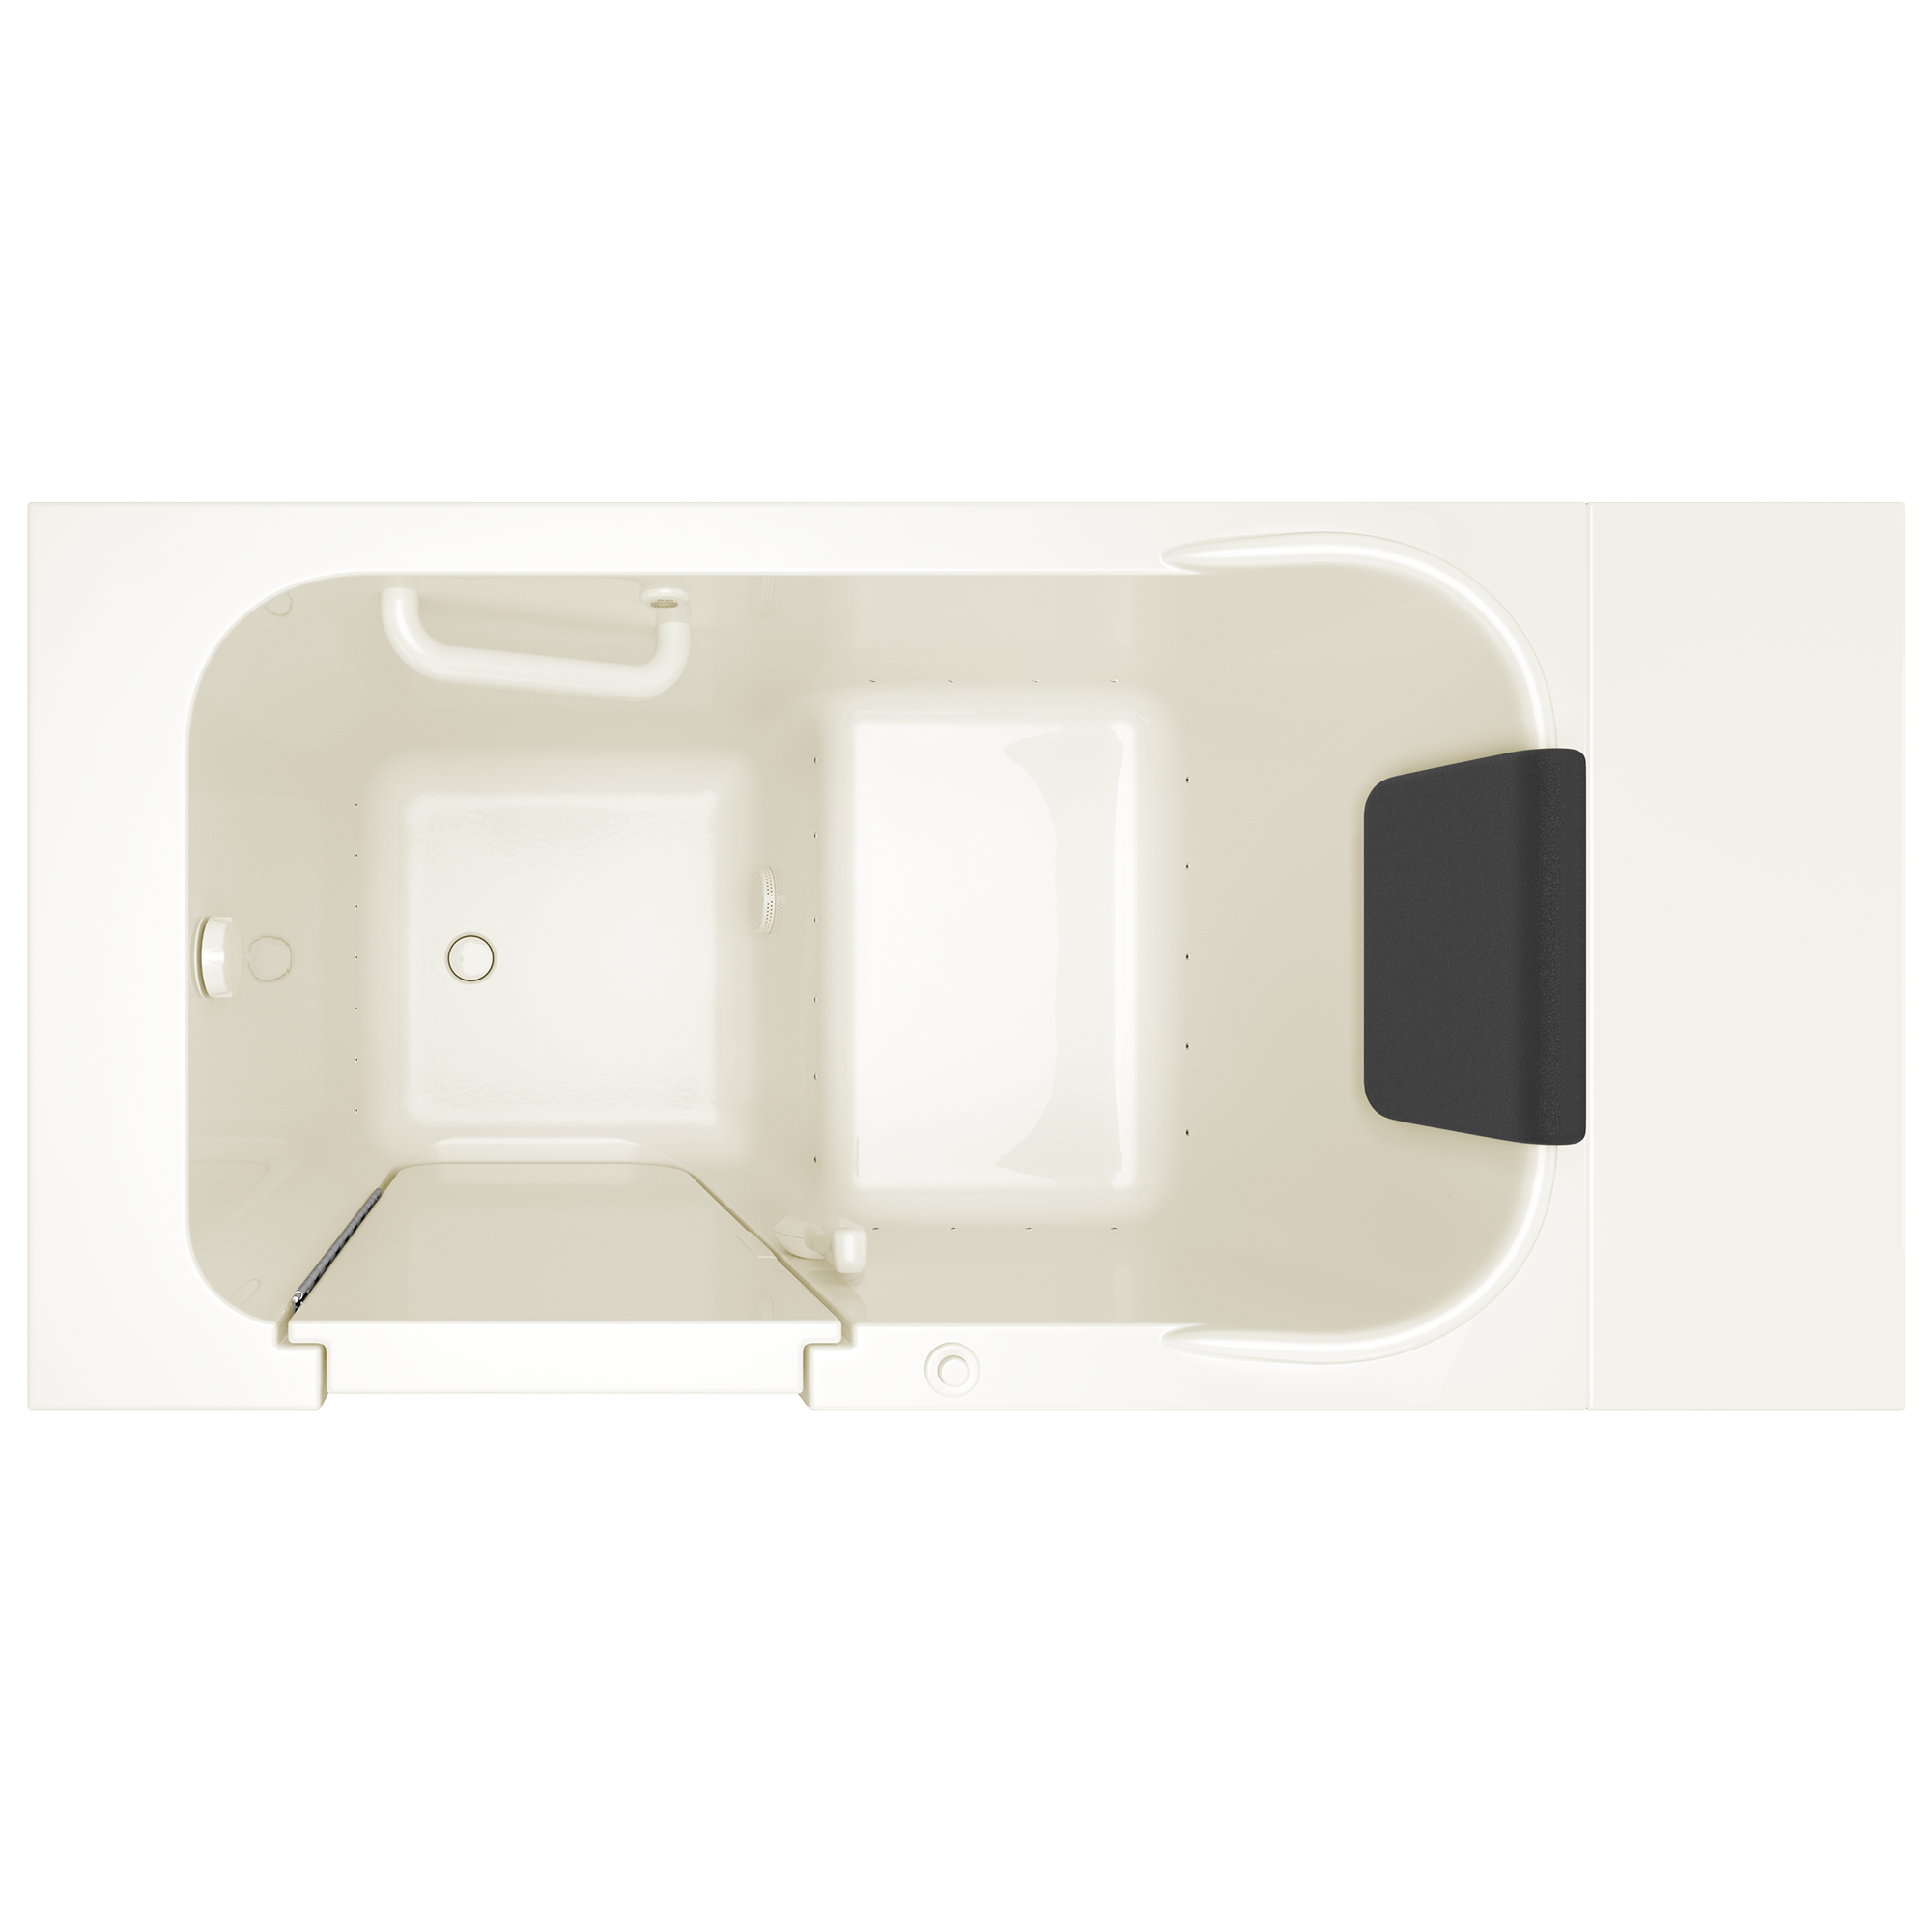 Gelcoat Premium Series 28 x 48-Inch Walk-in Tub With Air Spa System - Left-Hand Drain